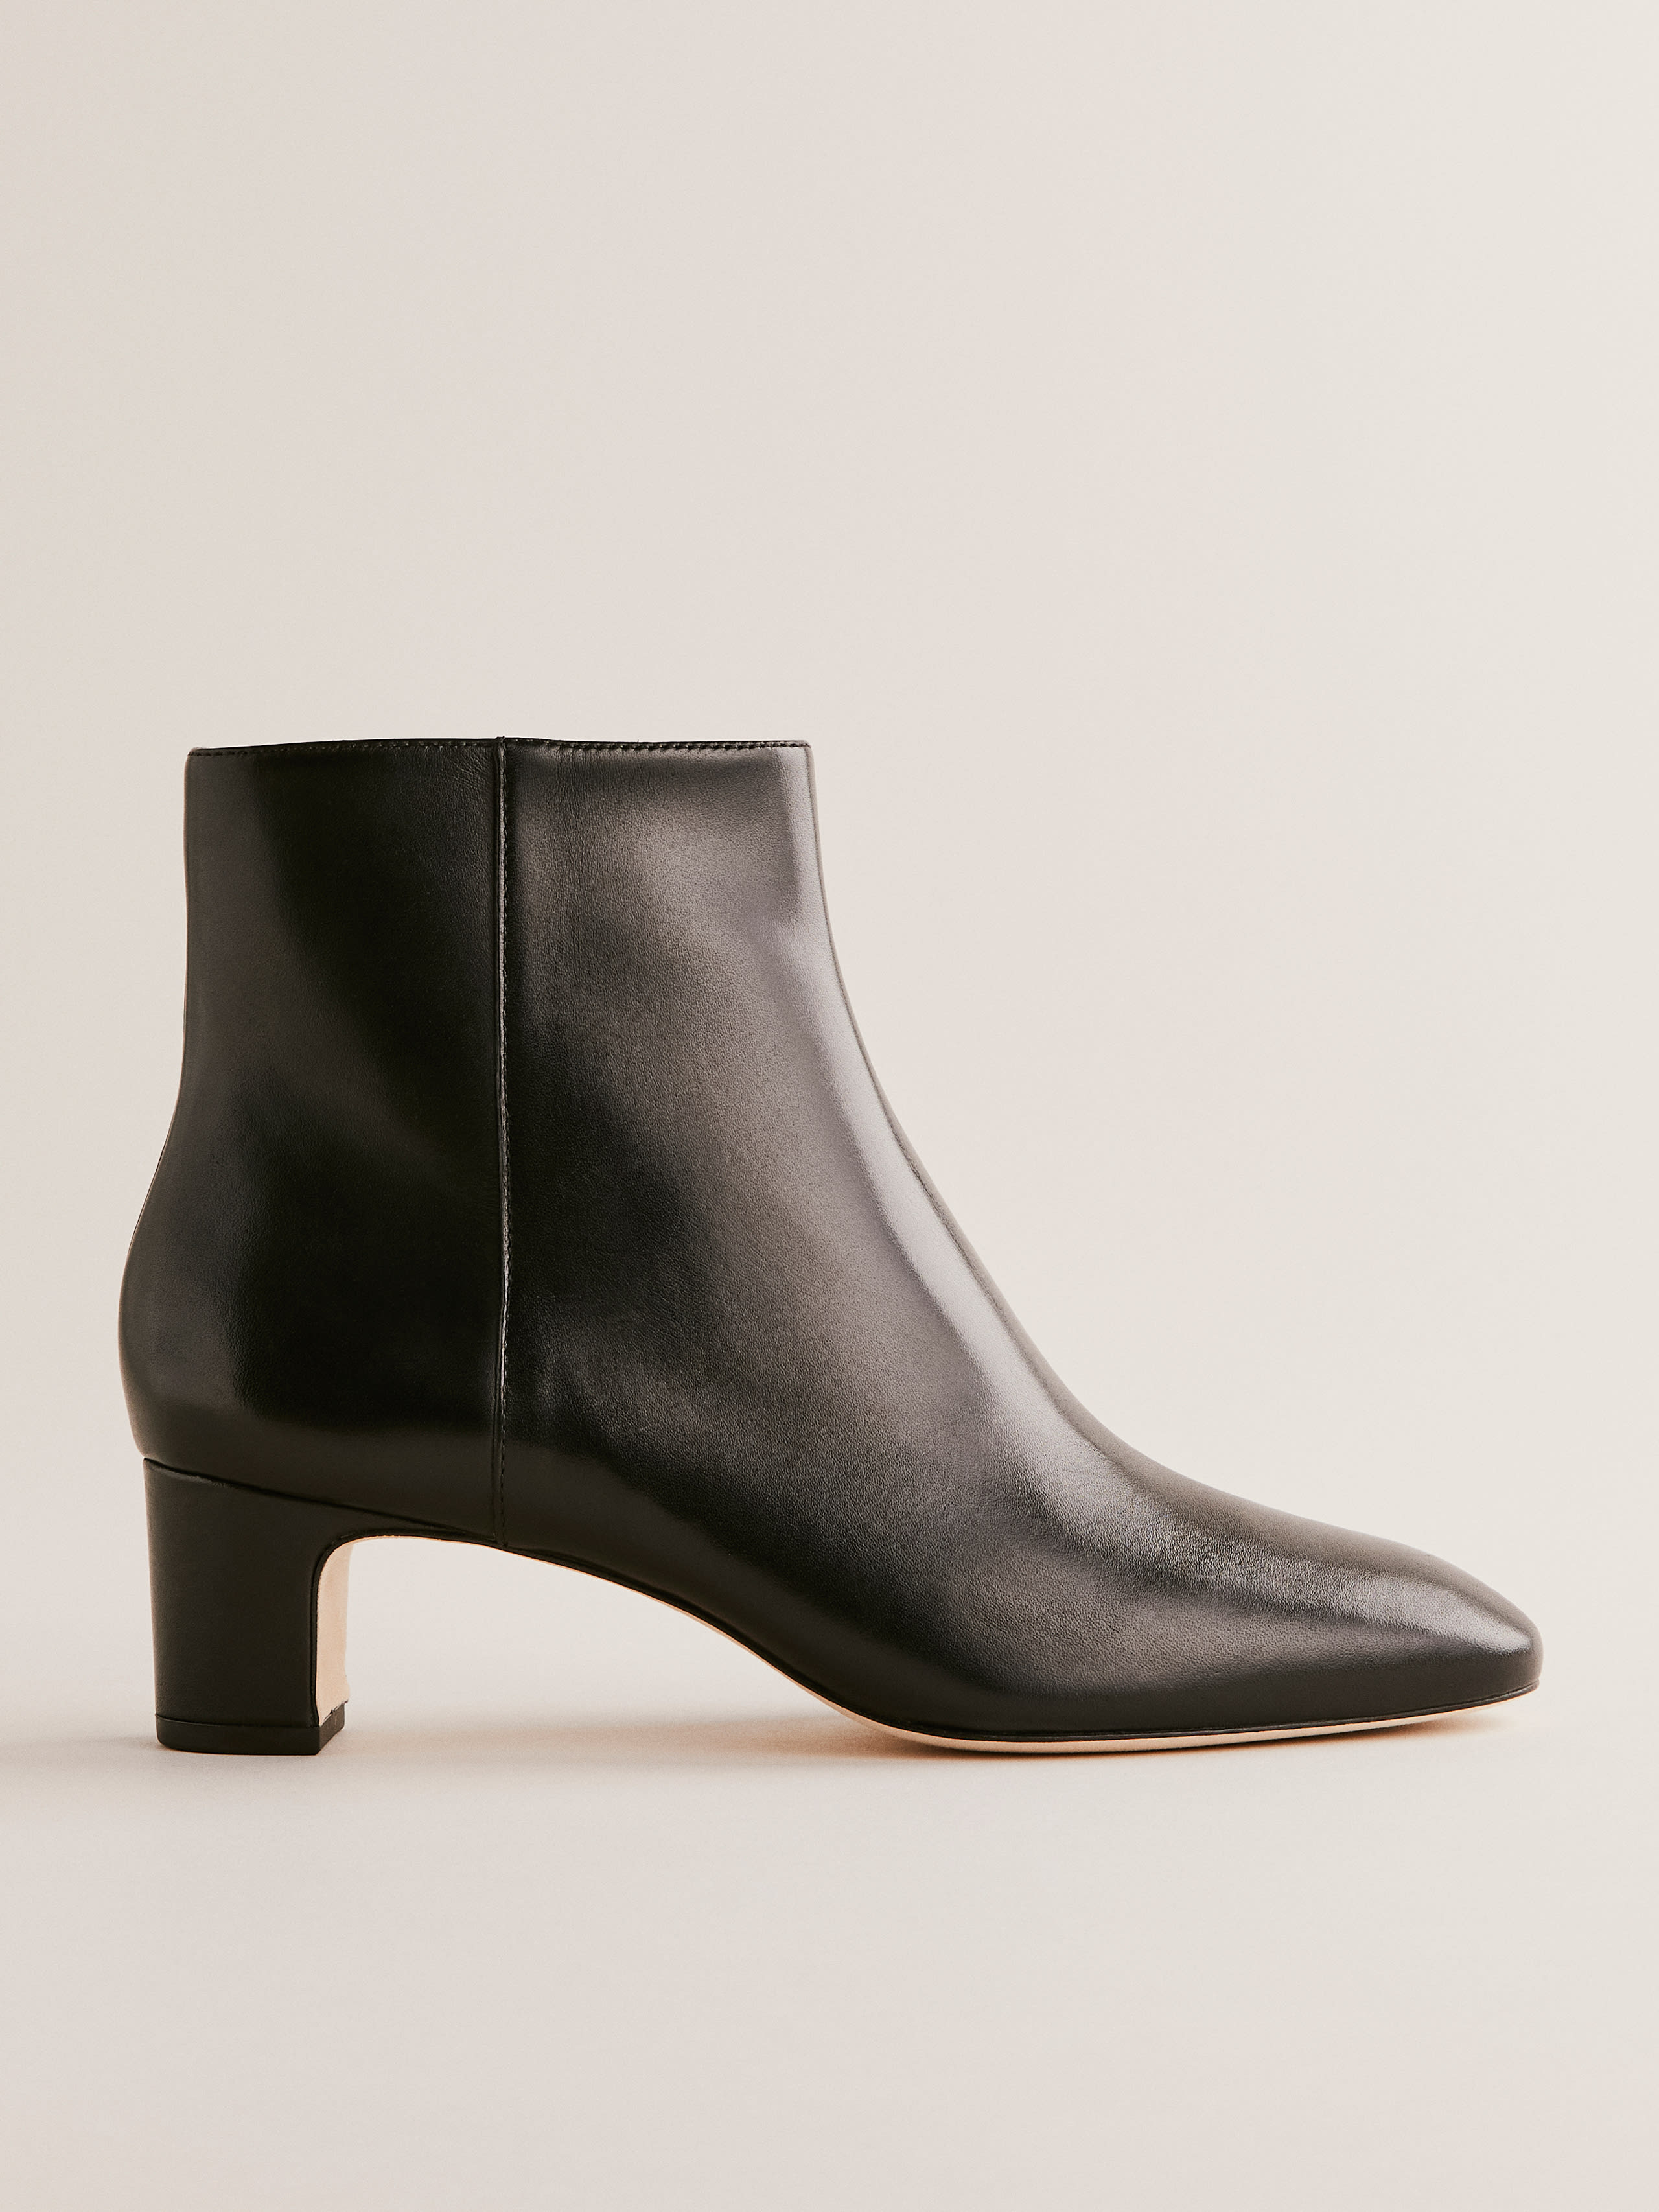 Reformation Giulietta Ankle Boot In Black Leather